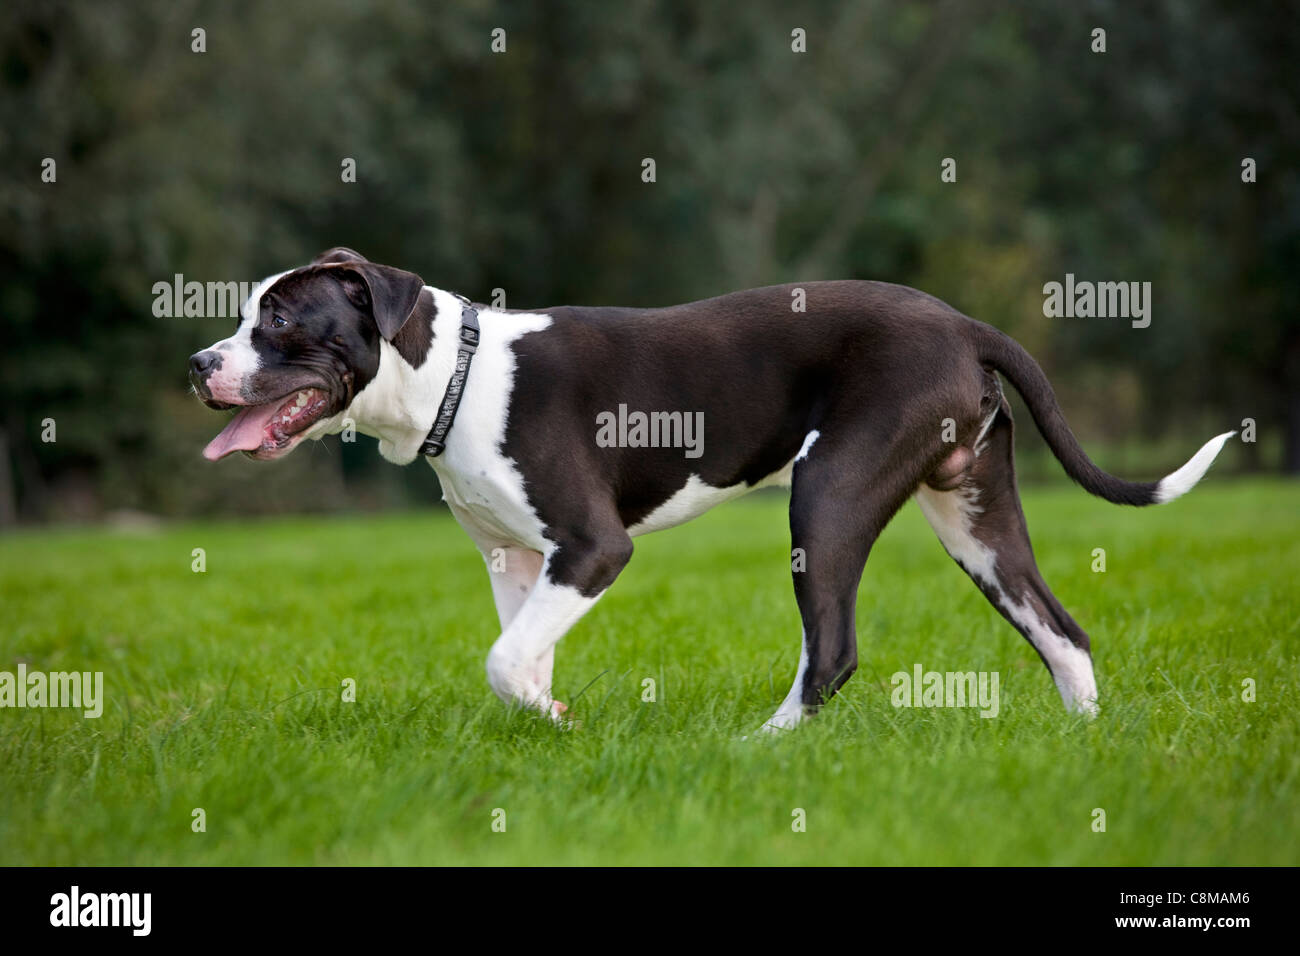 American Staffordshire terrier (Canis lupus familiaris) in garden Stock Photo